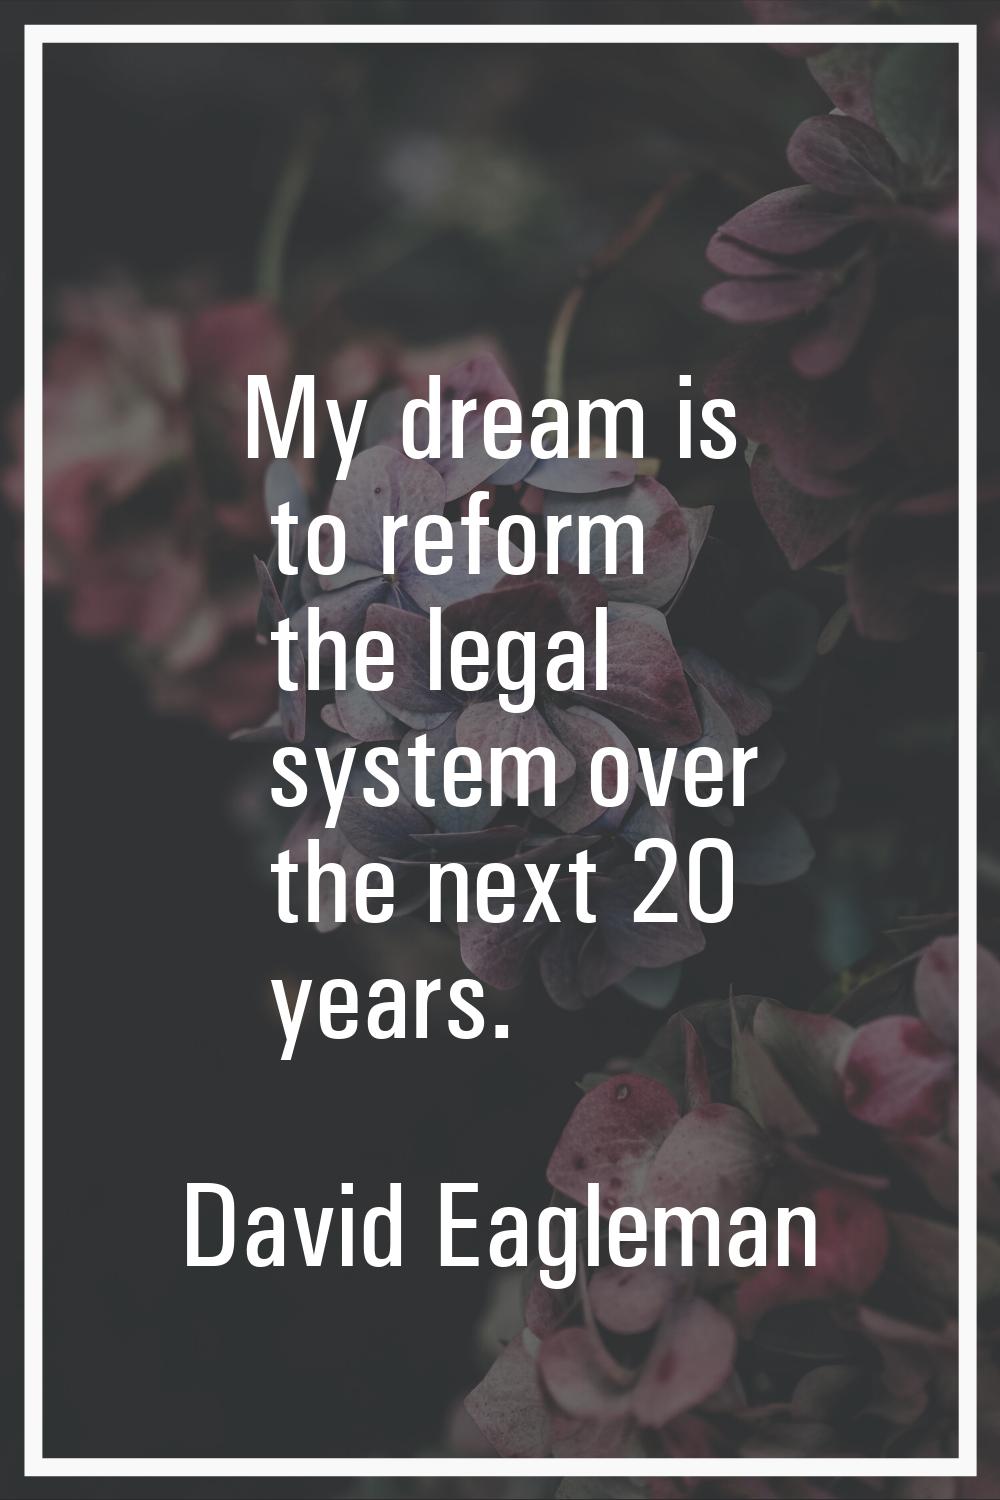 My dream is to reform the legal system over the next 20 years.